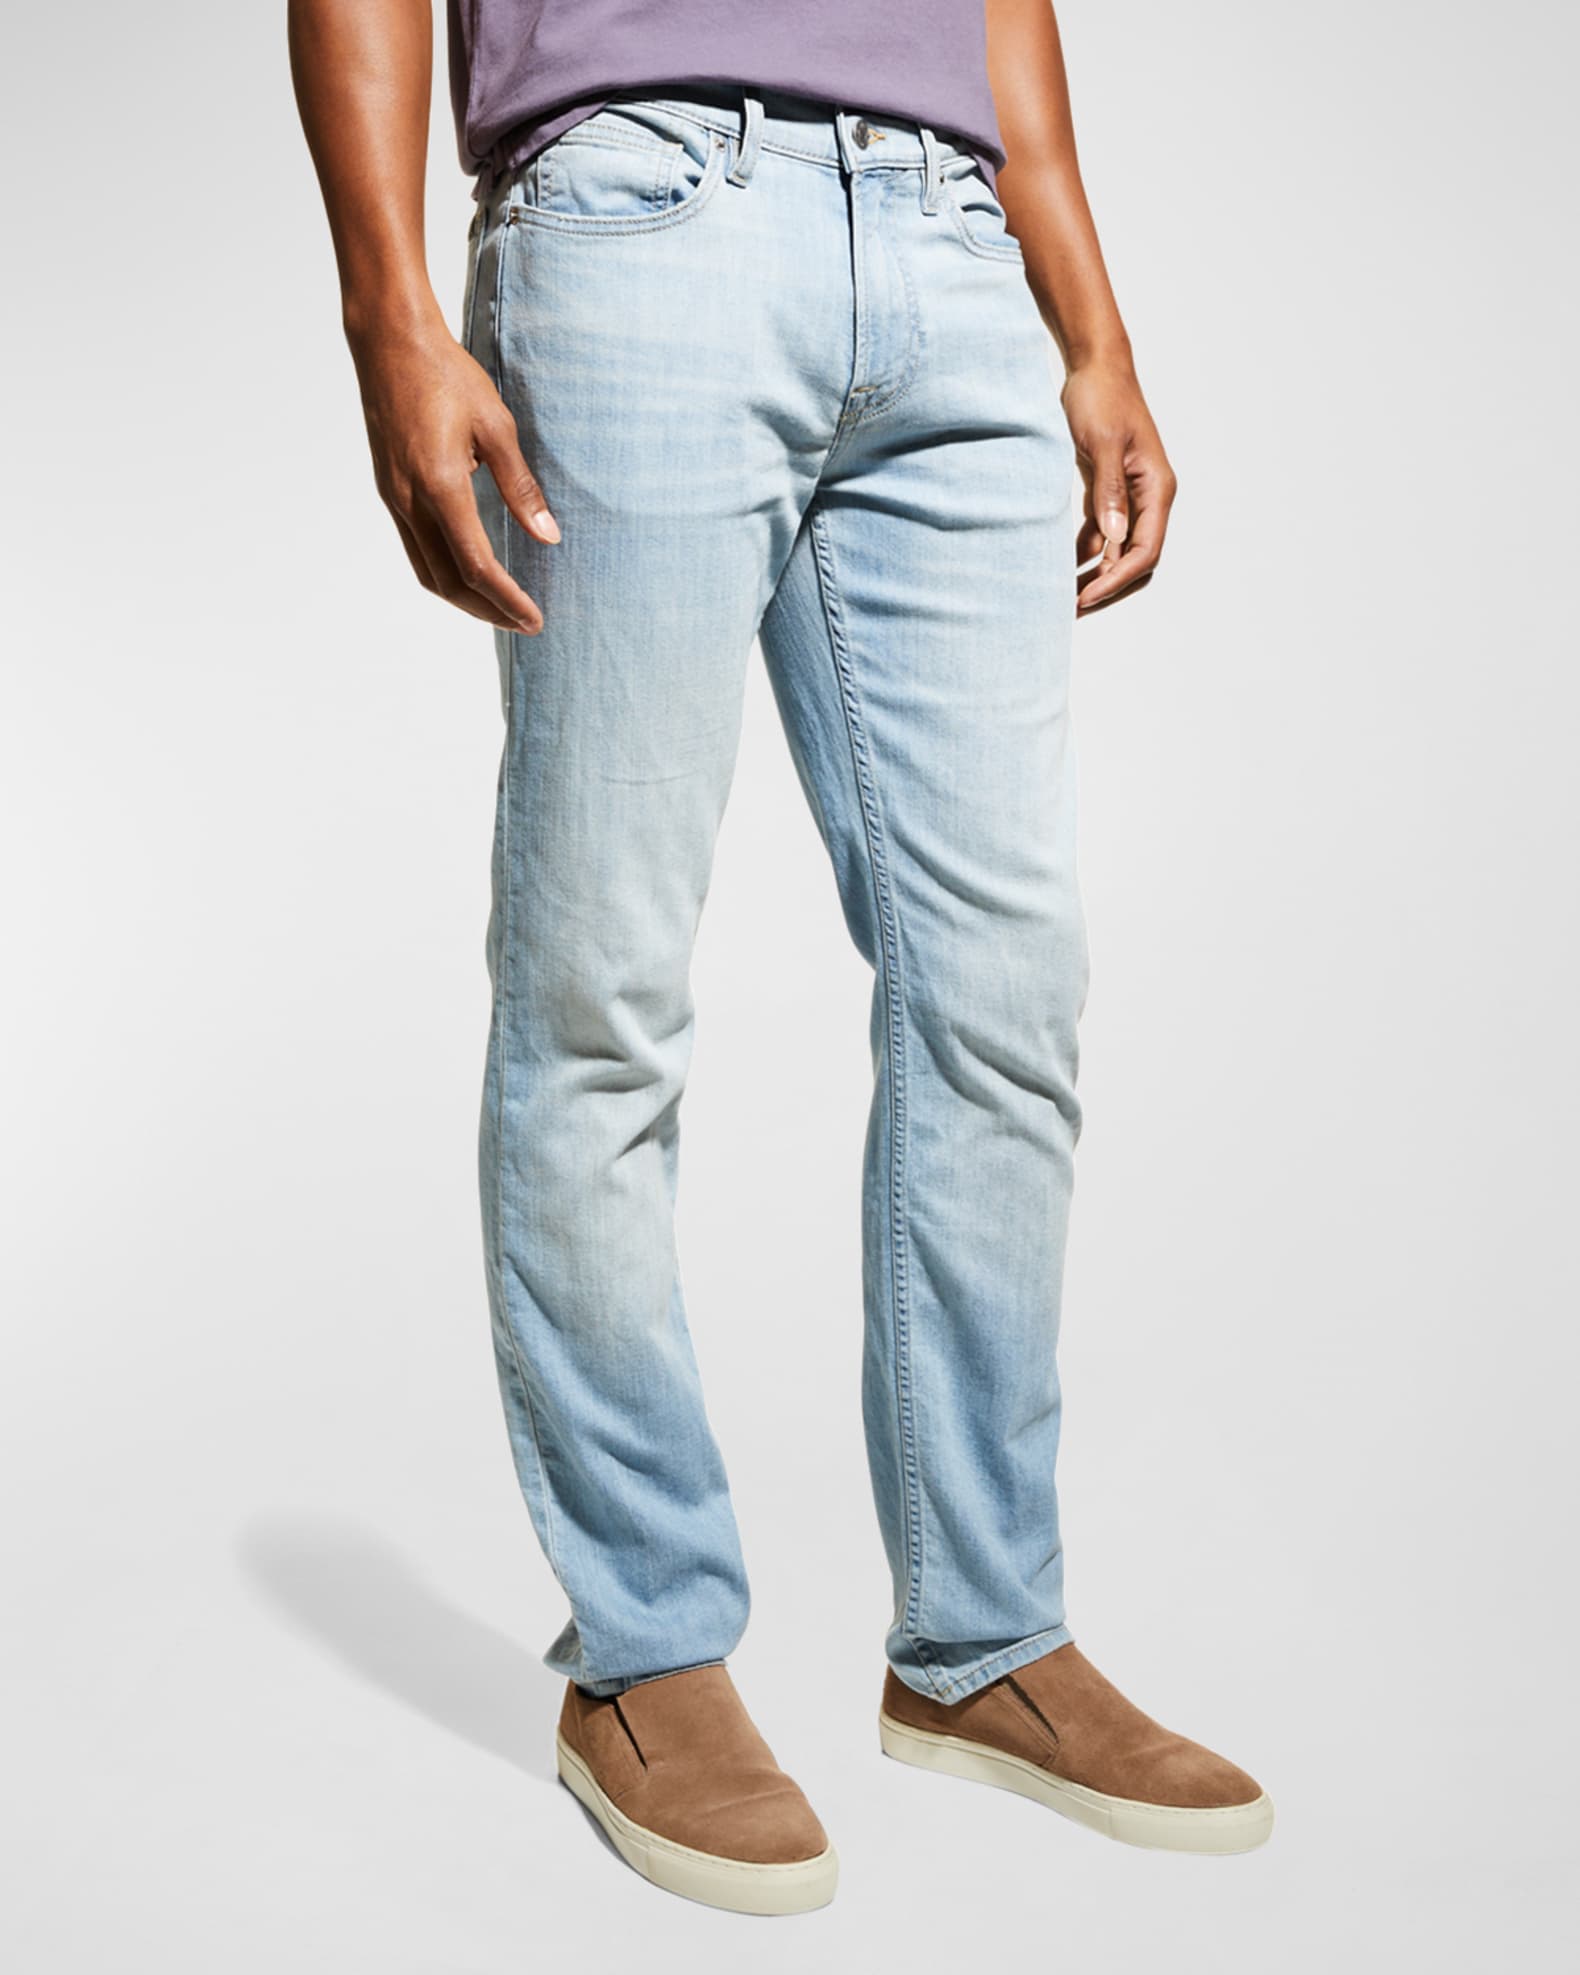 7 for all mankind Men's Slimmy Airweft Jeans | Neiman Marcus